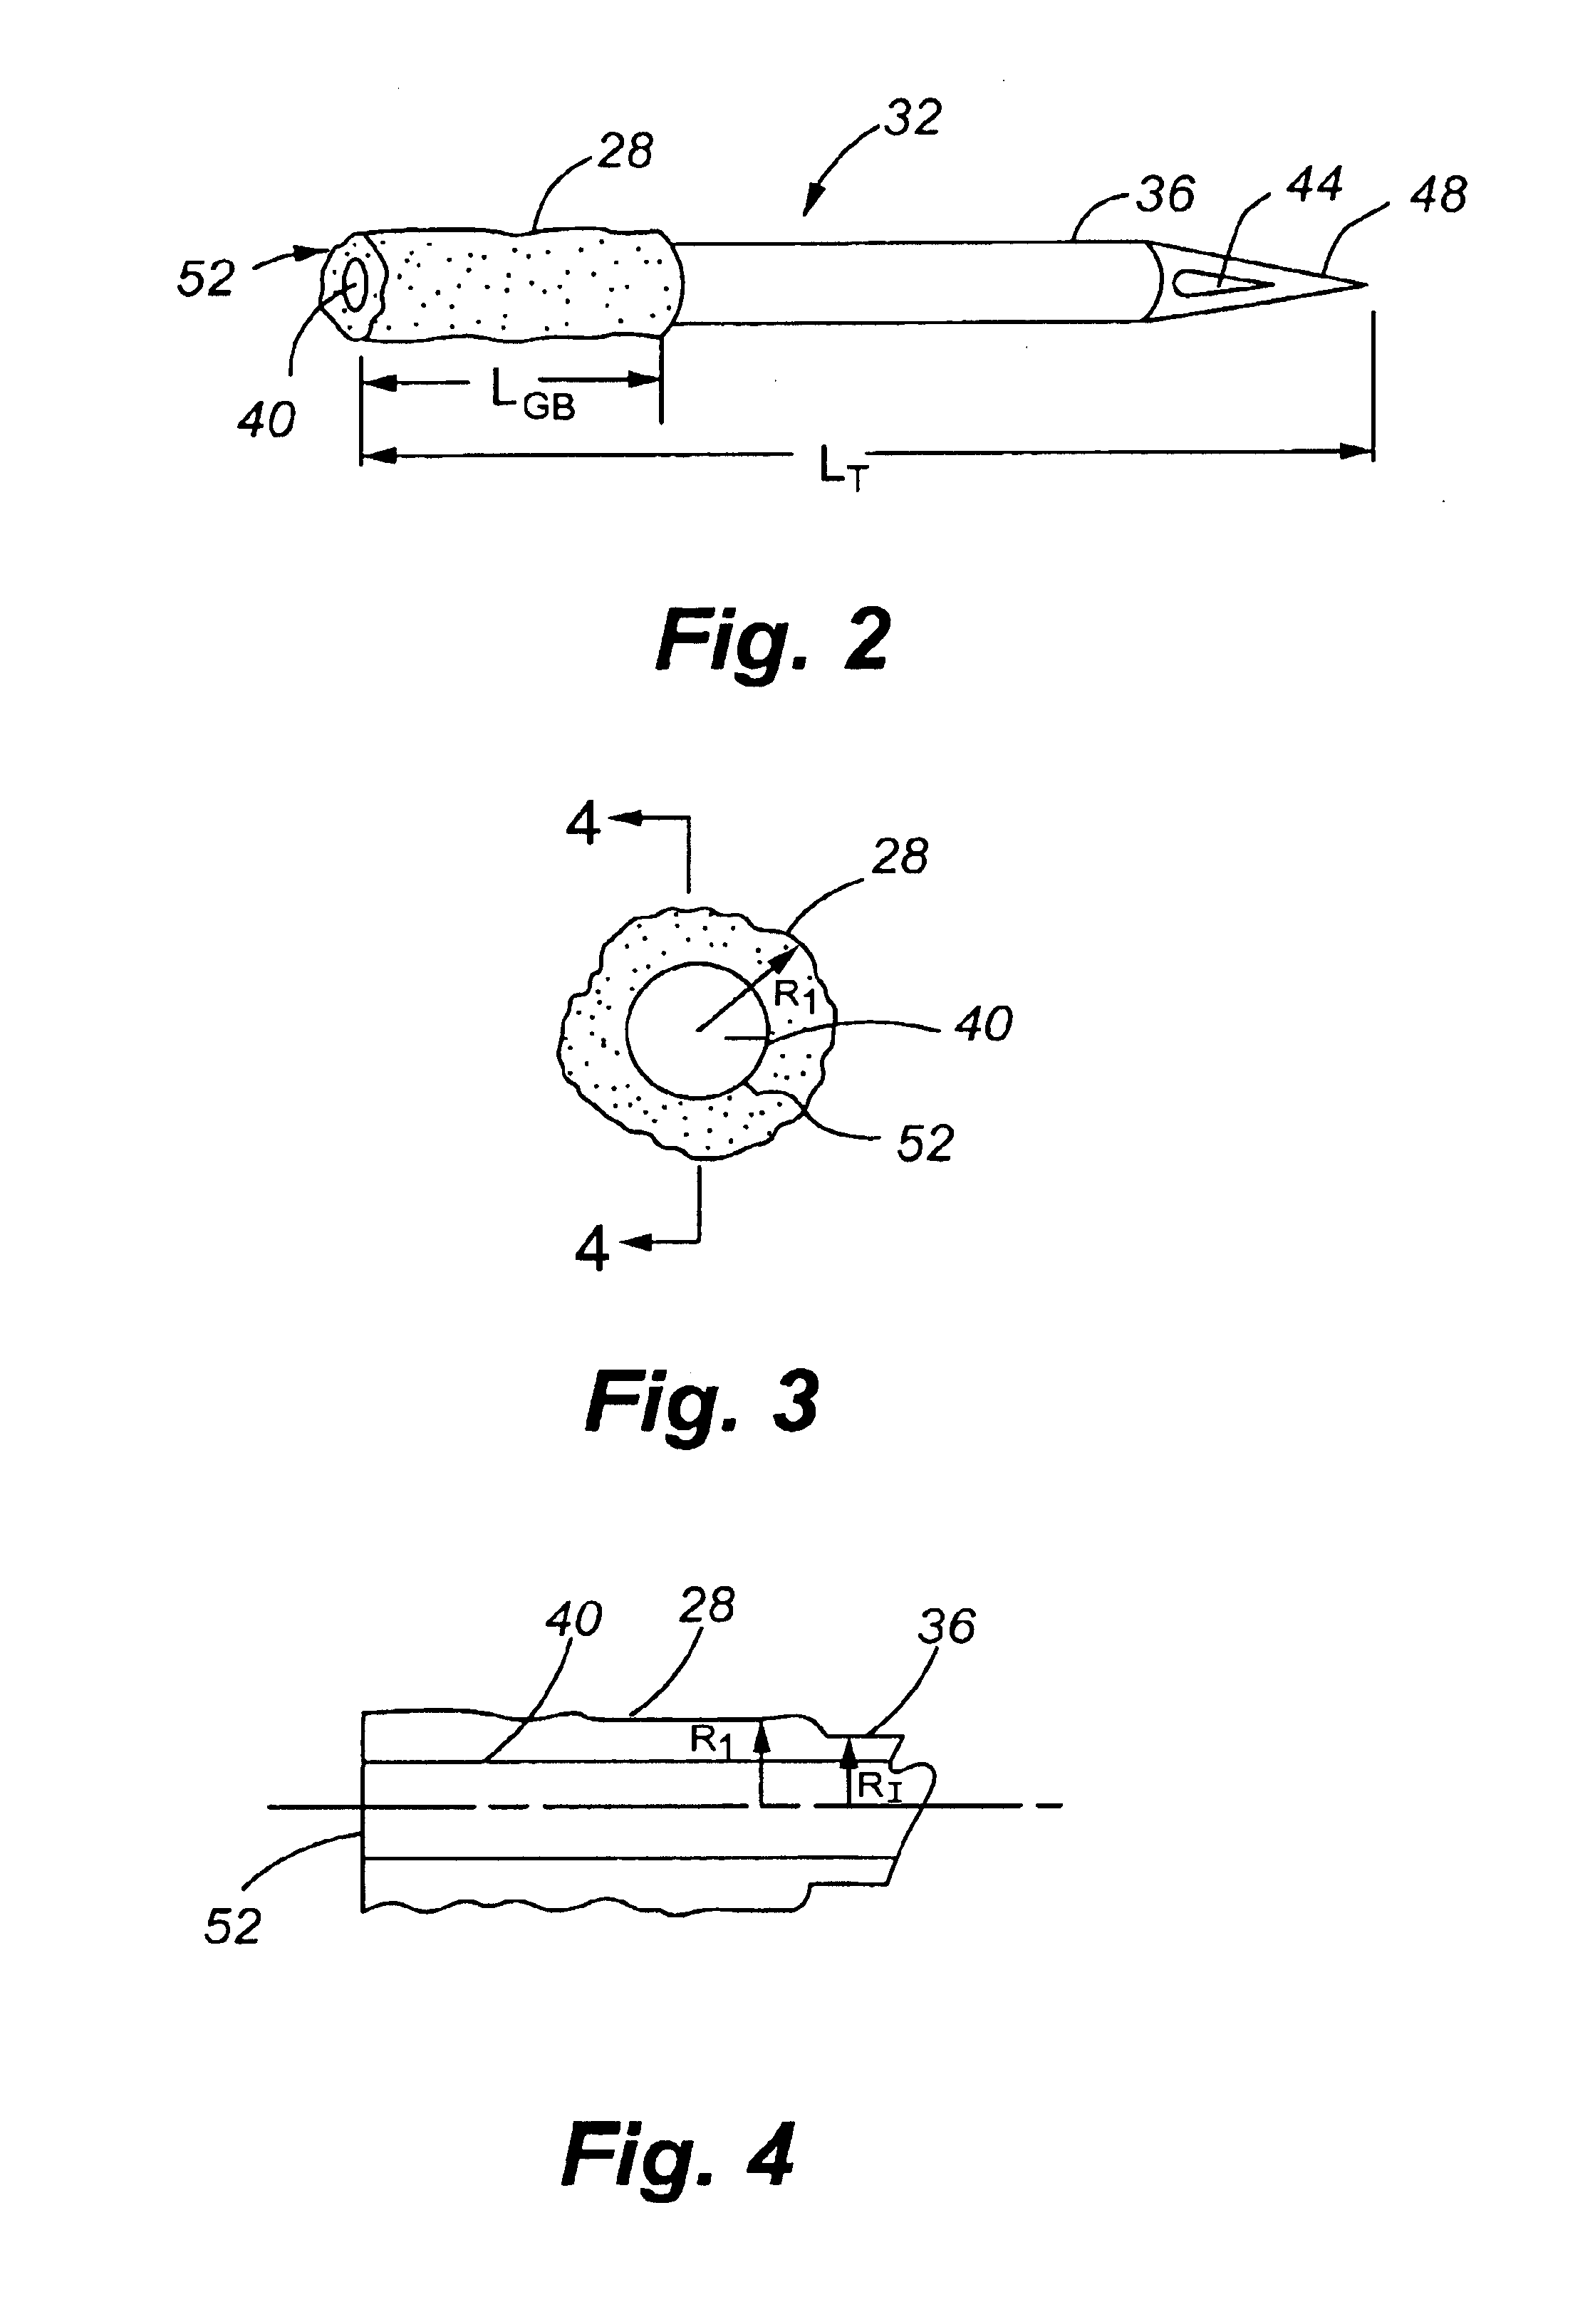 Method for manufacturing a cannula assembly